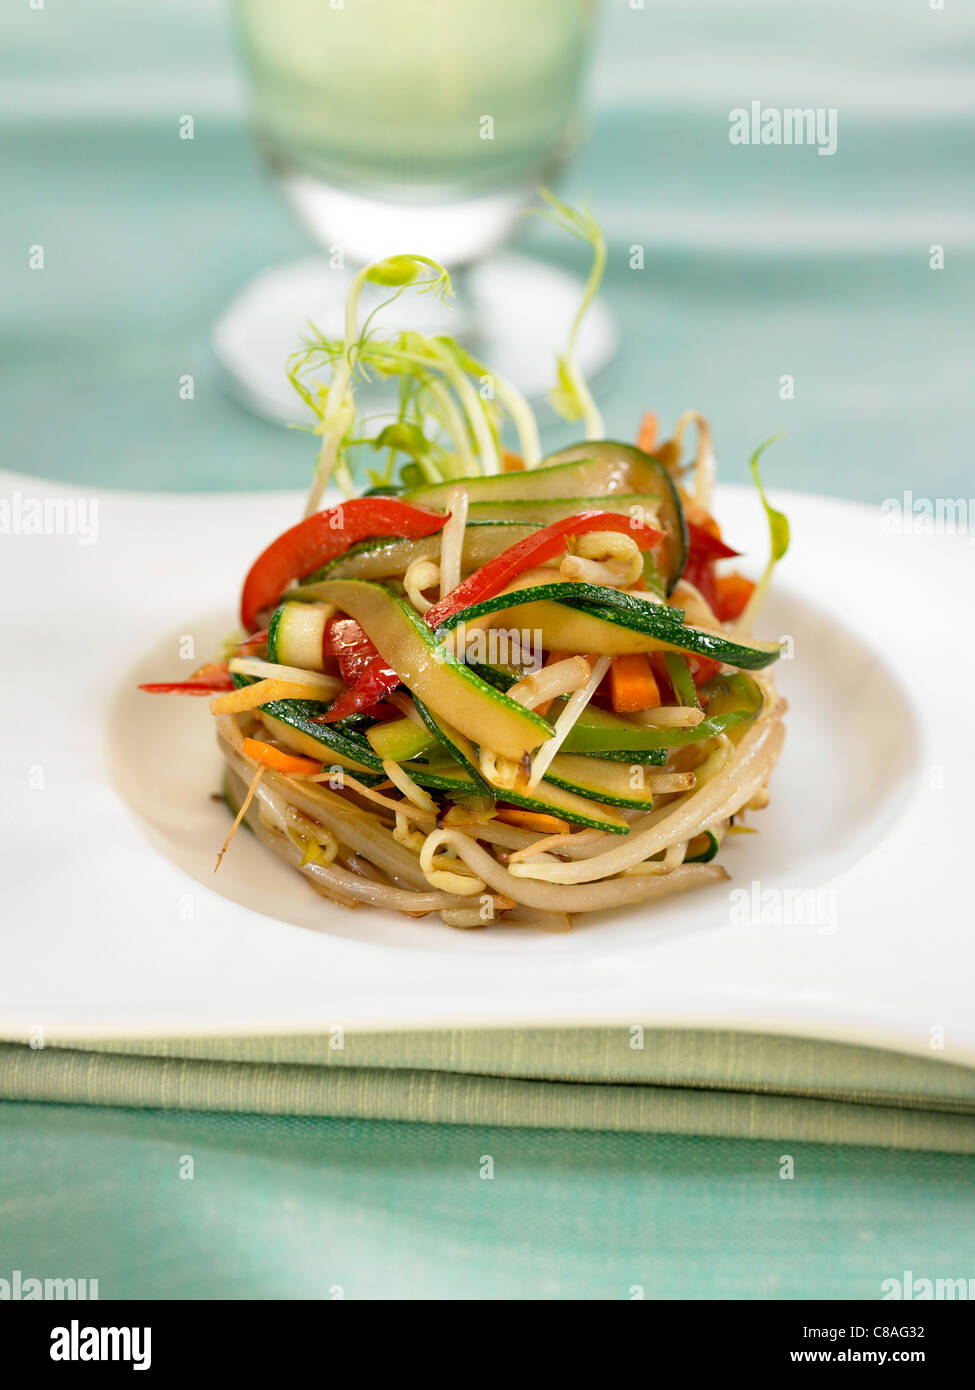 Sauteed beansprouts and vegetables Stock Photo